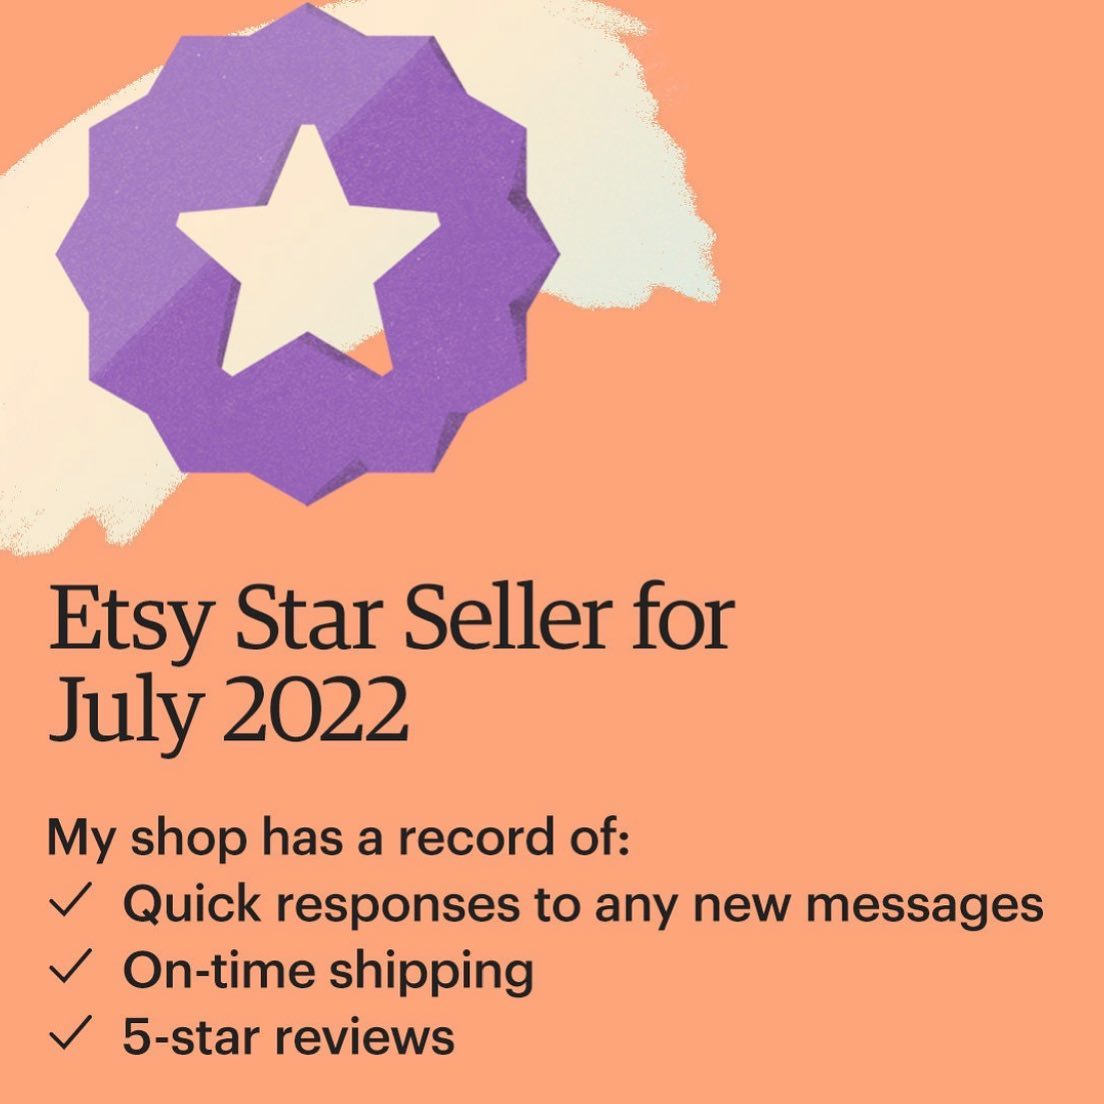 I’m a Star Seller on Etsy this month! That means you can purchase from my Etsy shop knowing I have a record of providing an excellent customer experience. #EtsyStarSeller #darknessjewelry #occultjewelry #satanicjewelry #wiccanjewelry #etsy